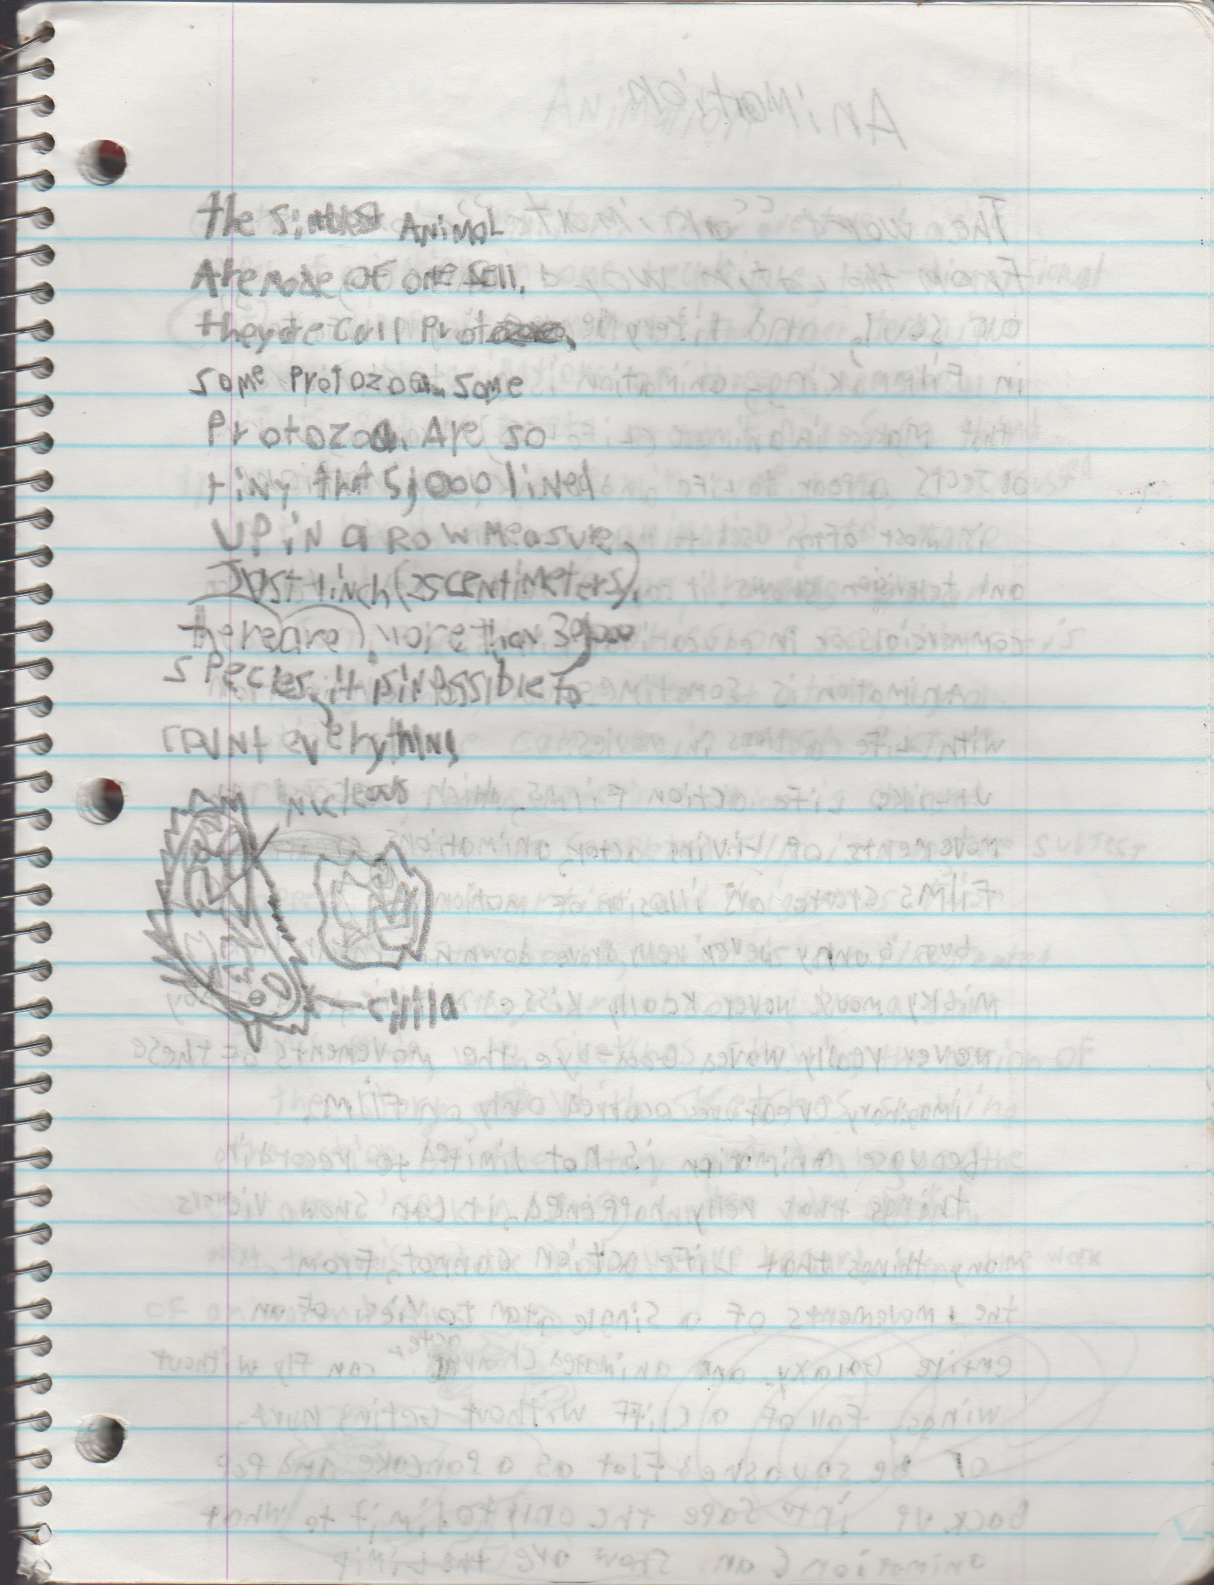 1996-08-18 - Saturday - 11 yr old Joey Arnold's School Book, dates through to 1998 apx, mostly 96, Writings, Drawings, Etc-007.png